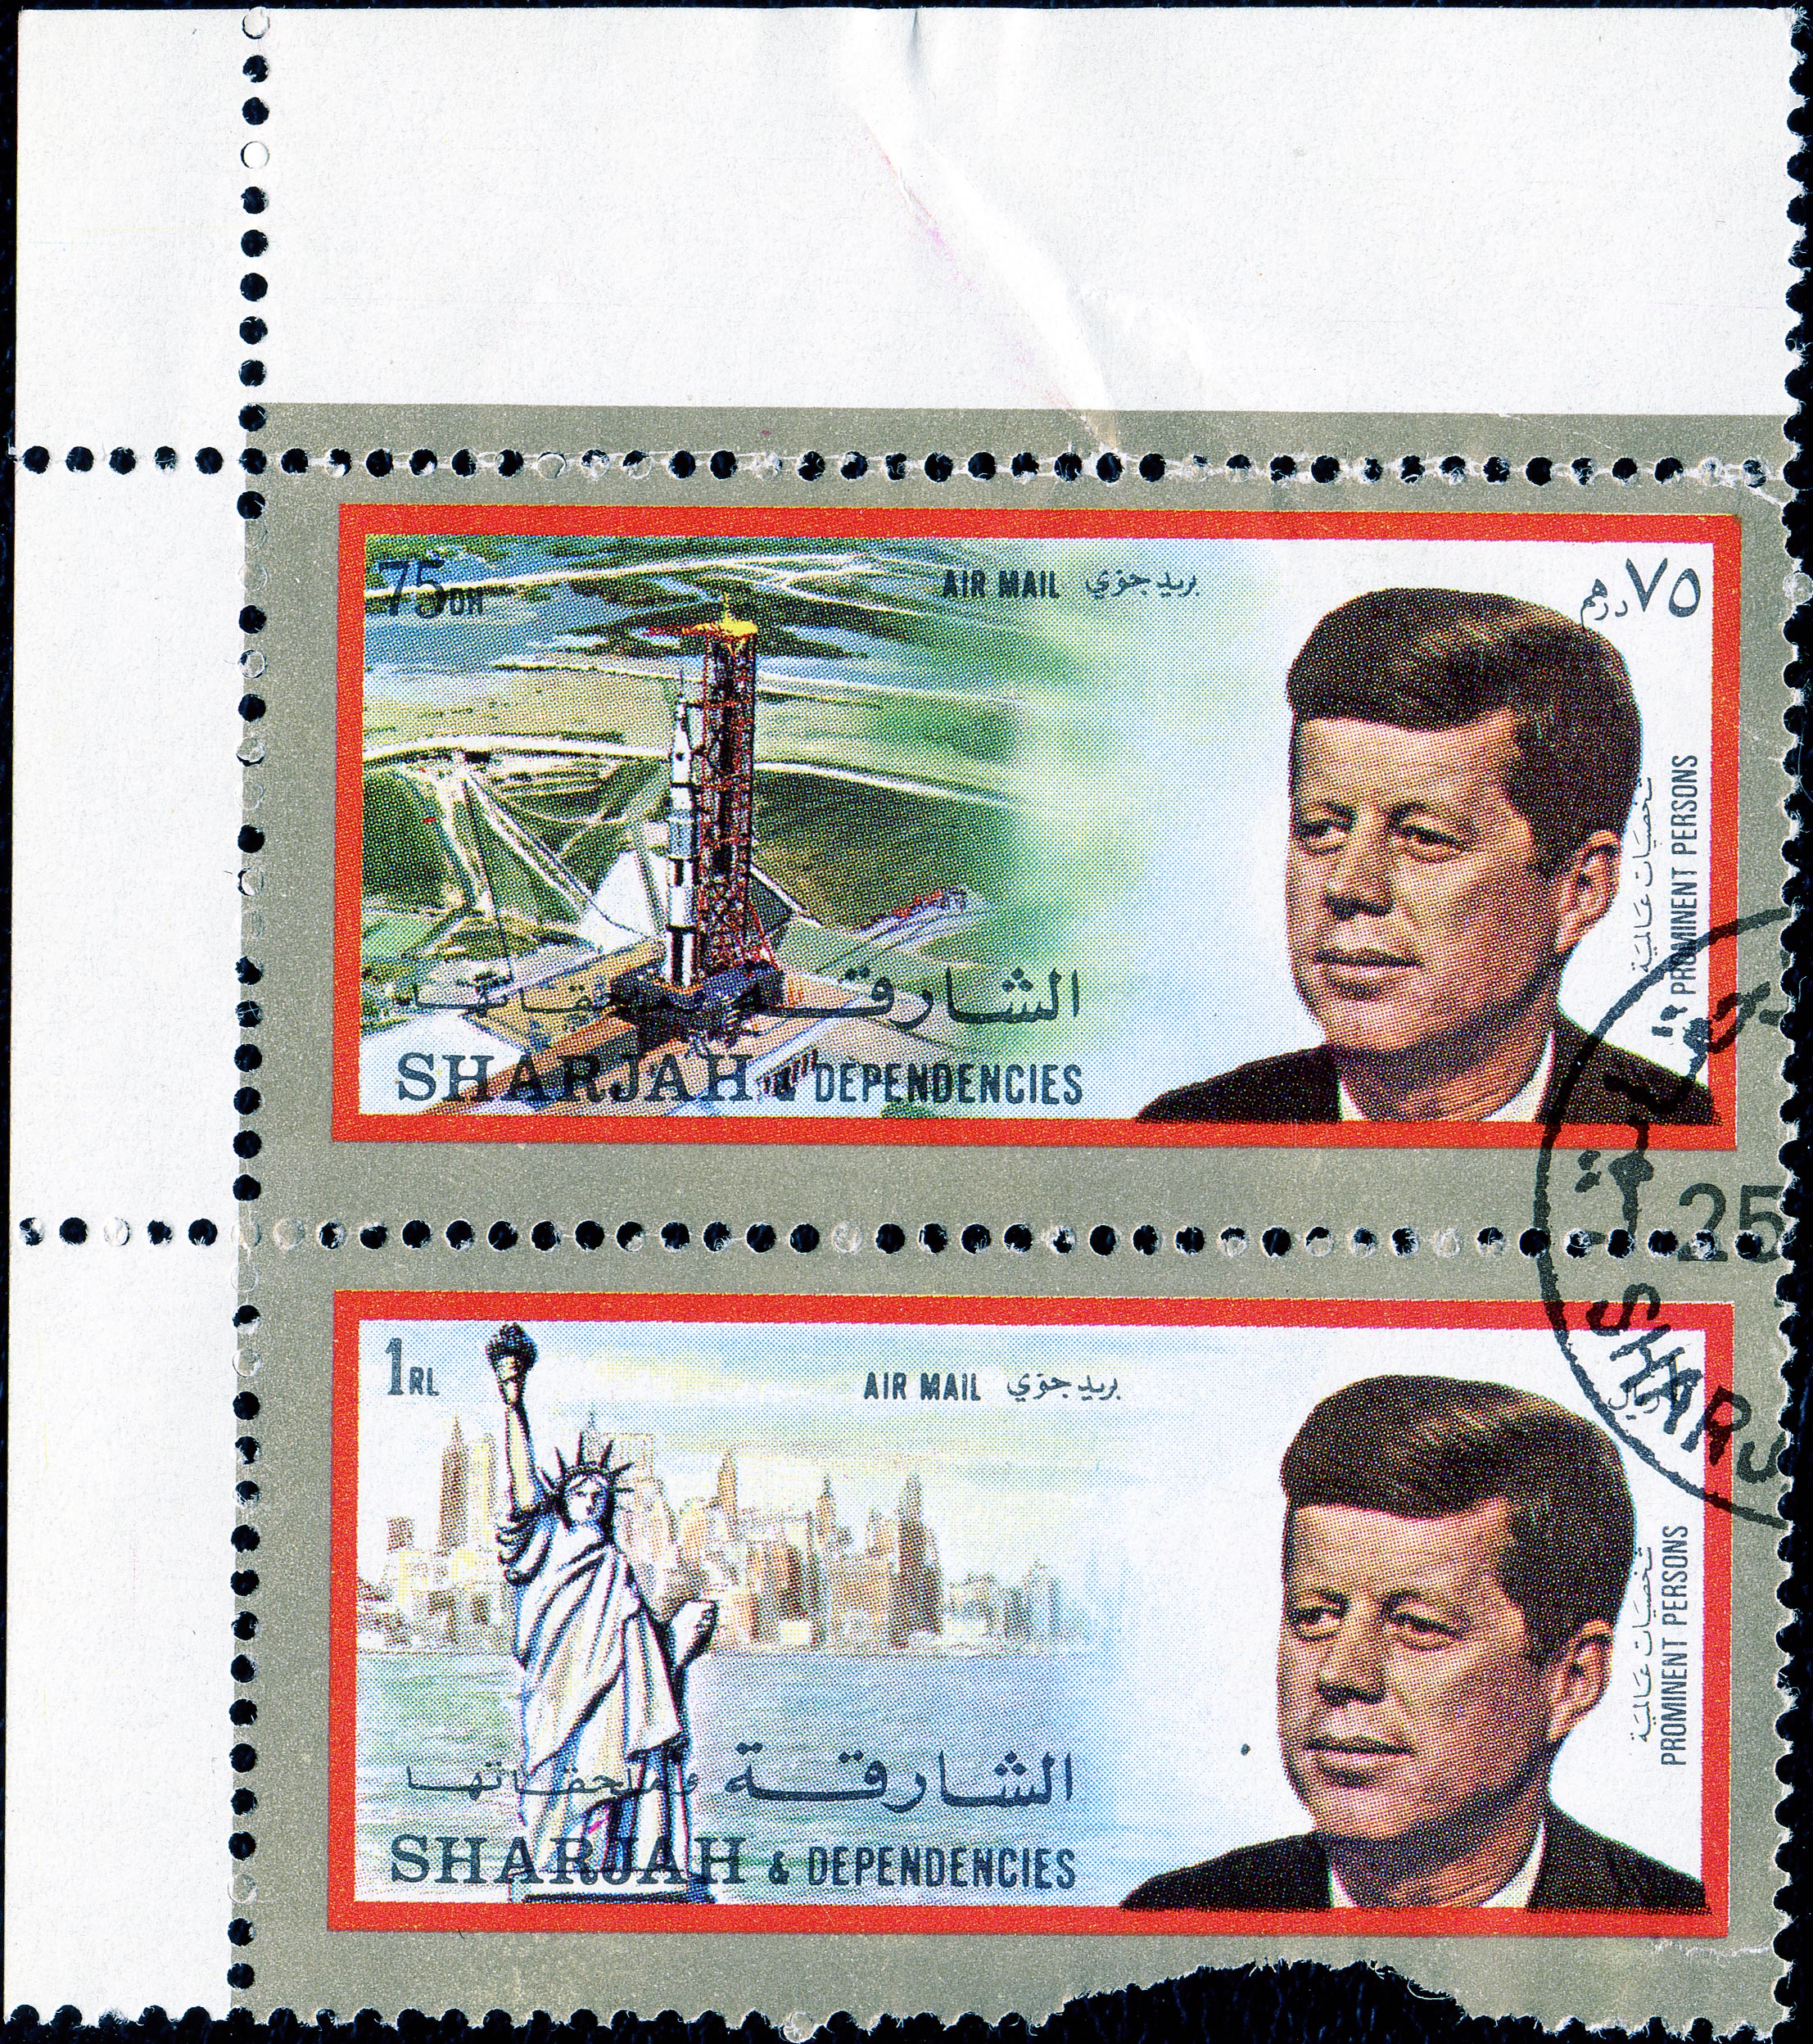 Stamps of Sharjah 04